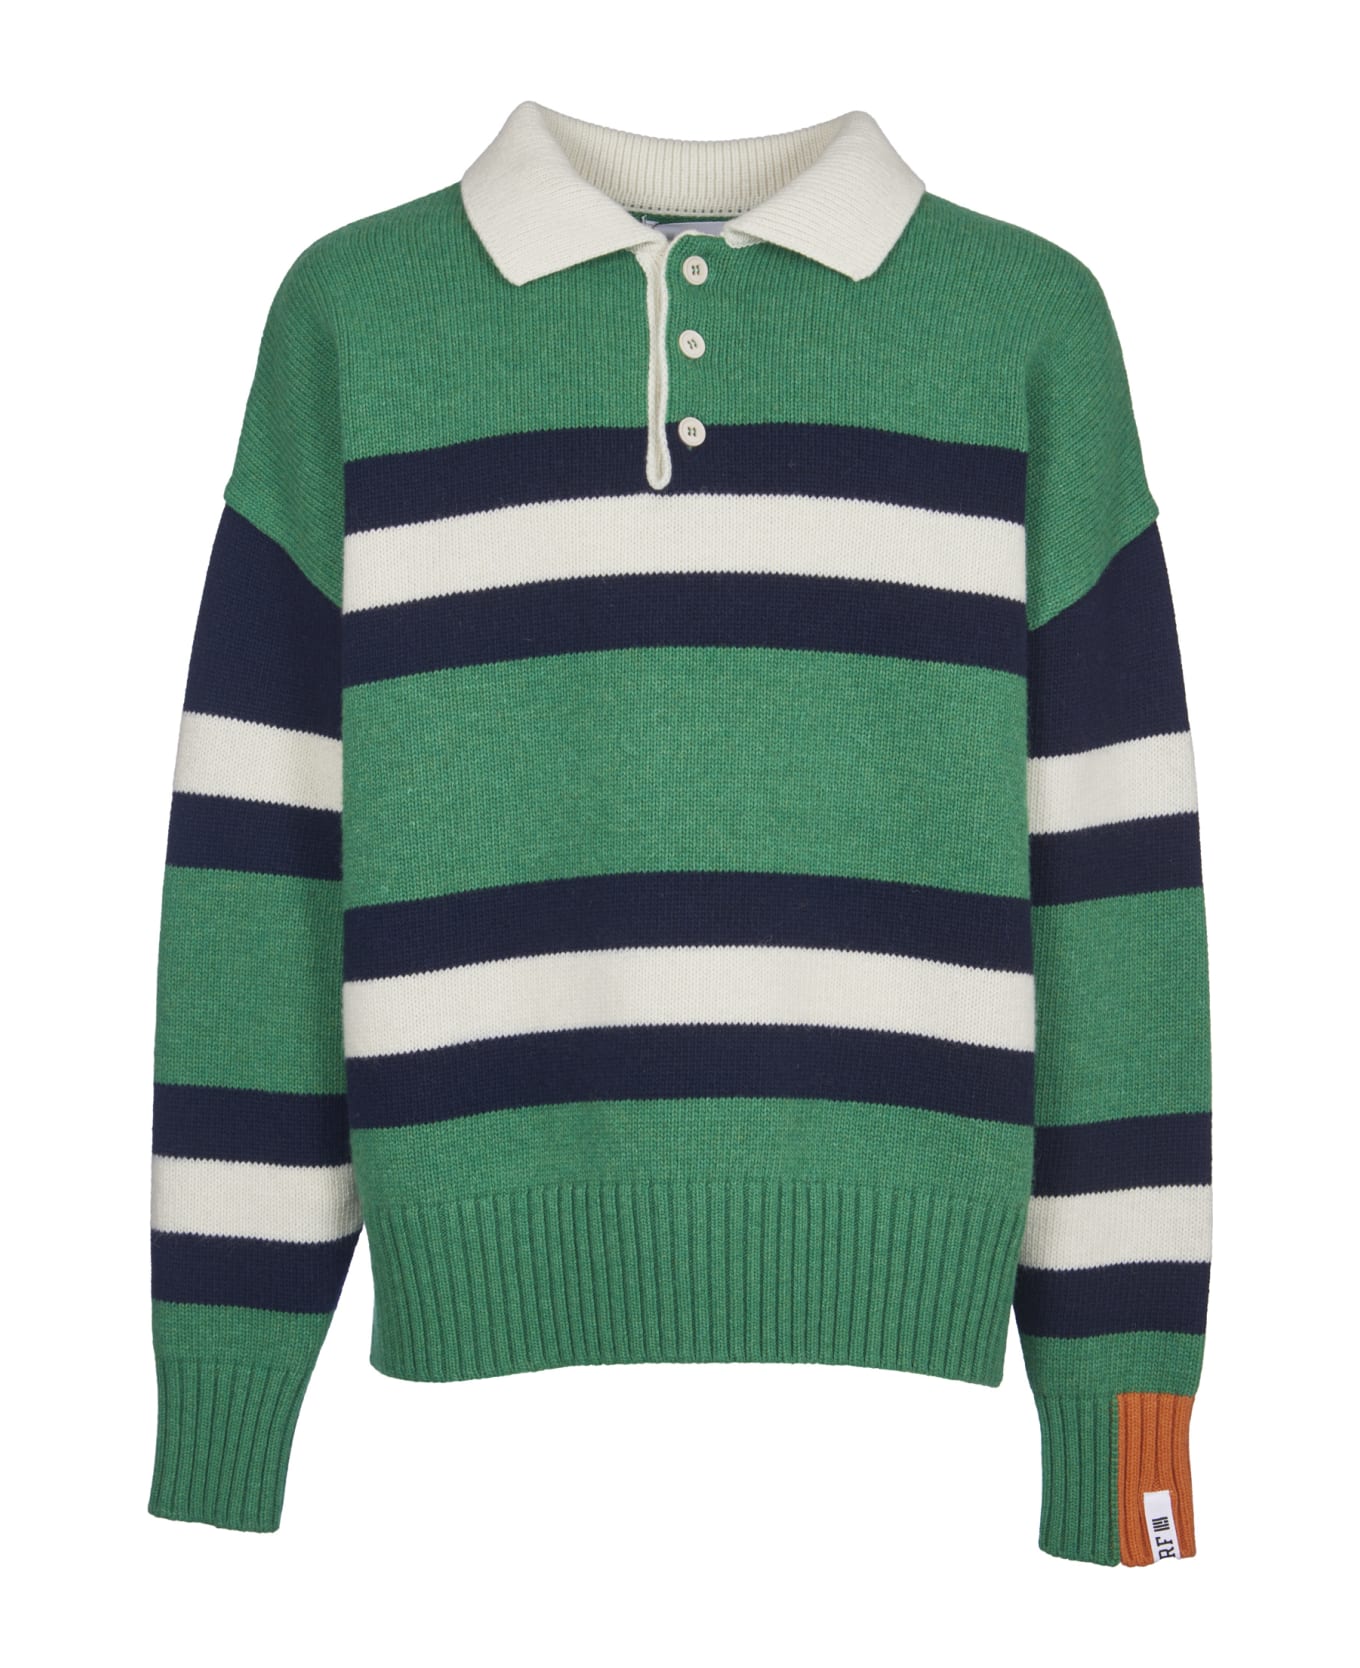 Right For Green Polo Striped Sweater - Verde